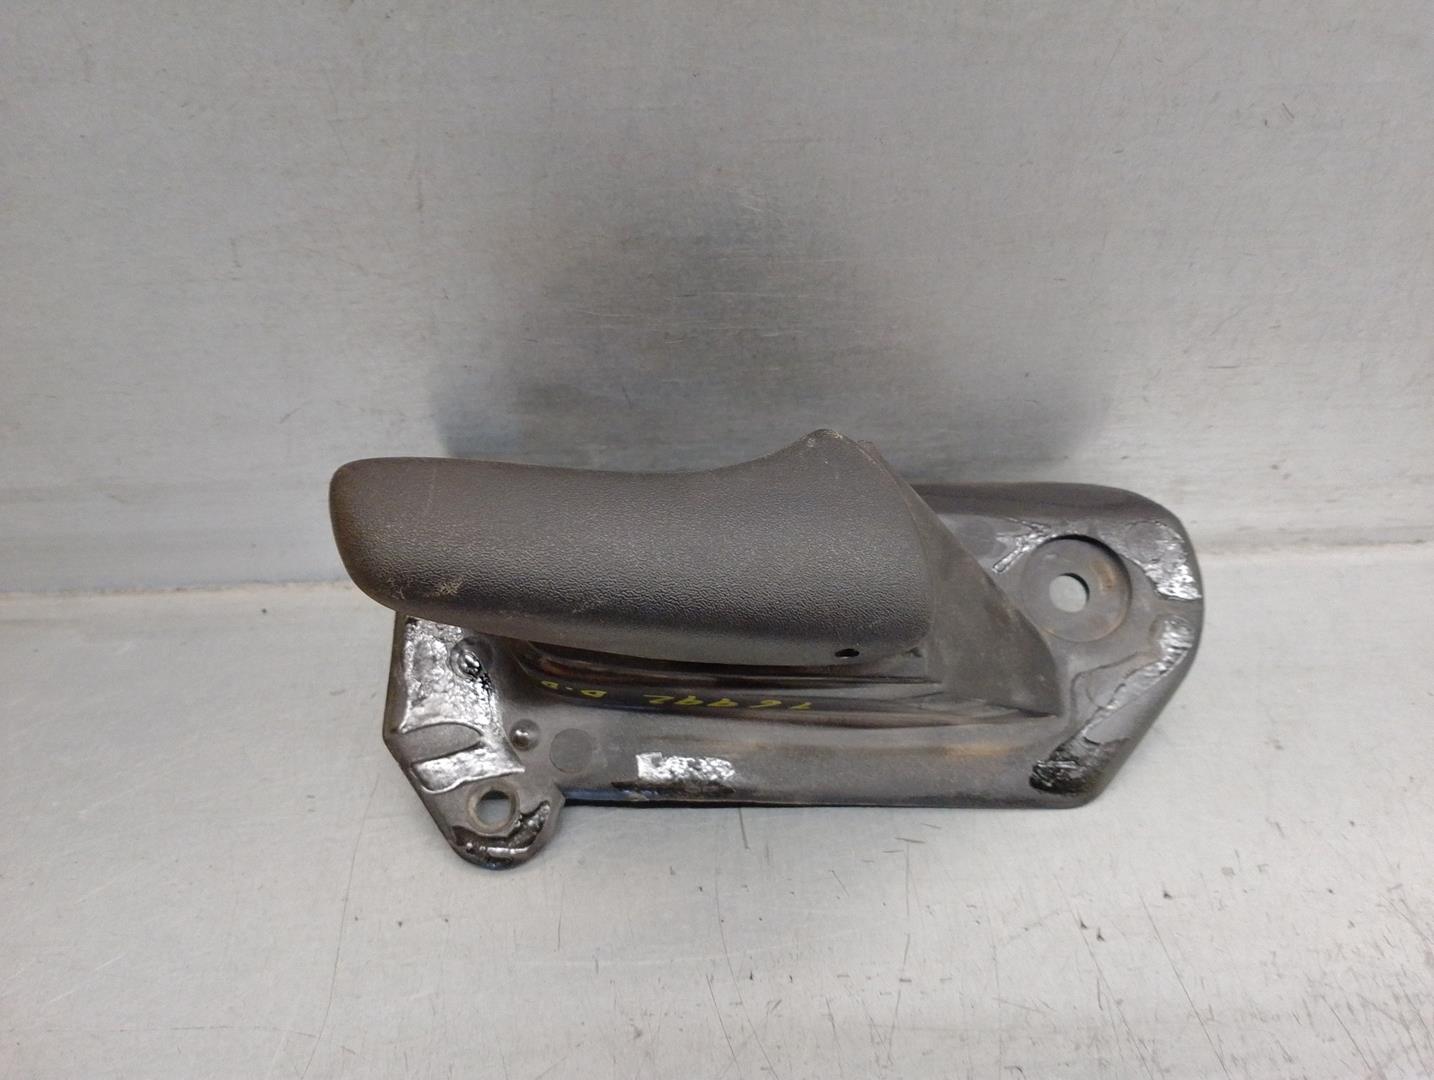 OPEL Astra F (1991-2002) Other Interior Parts 90381688 19895587